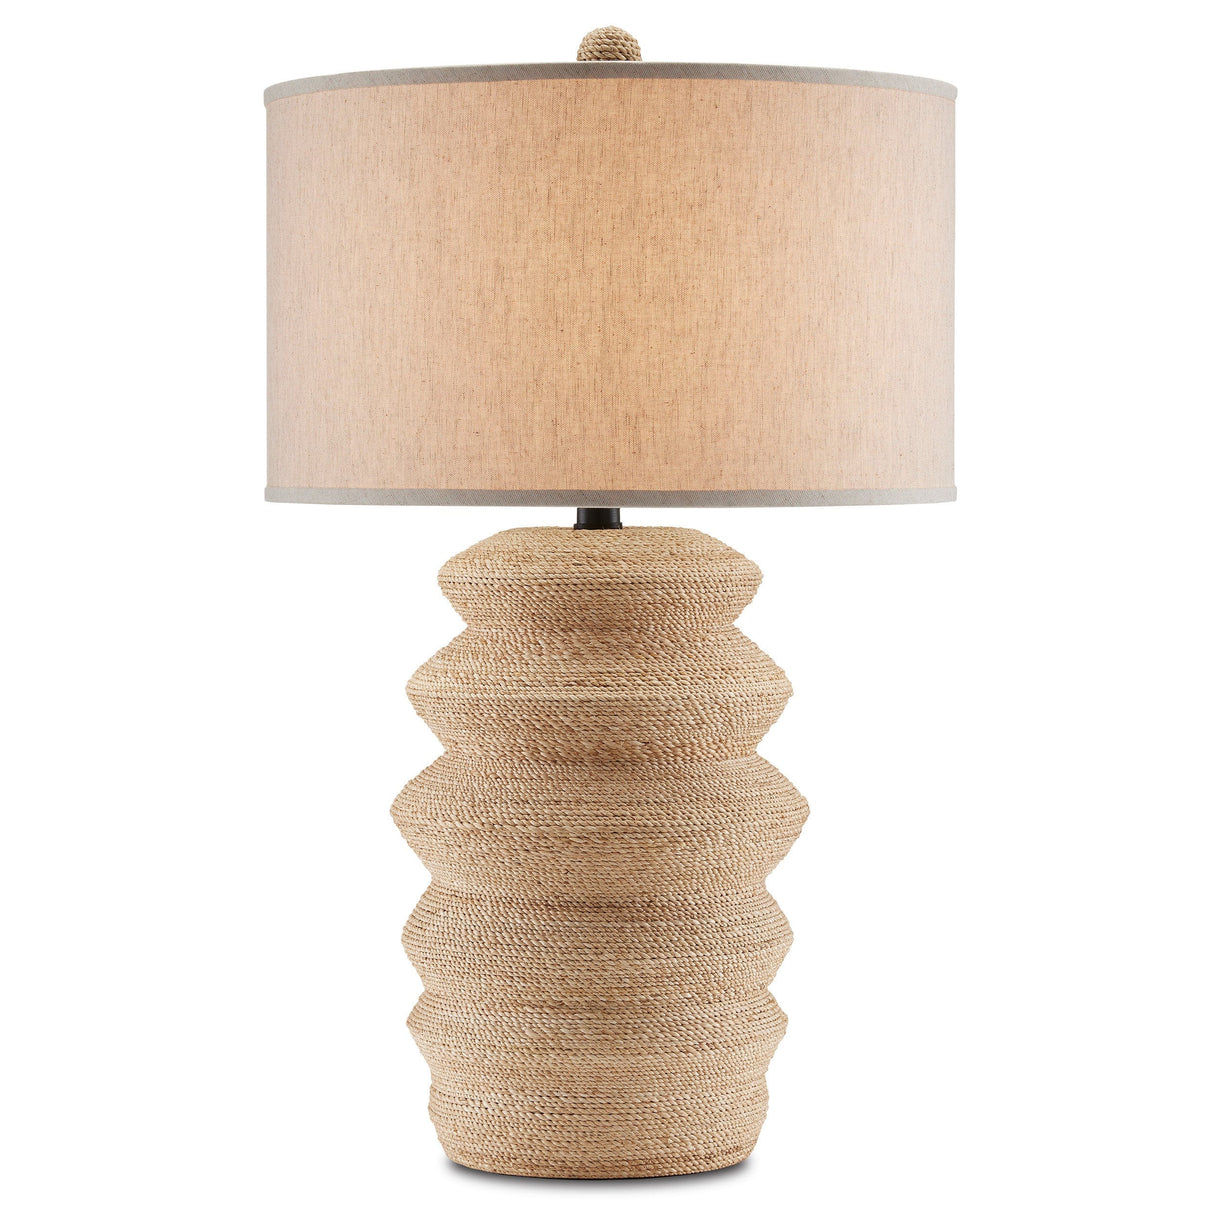 Currey and Company Kavala Table Lamp currey-co-6000-0798